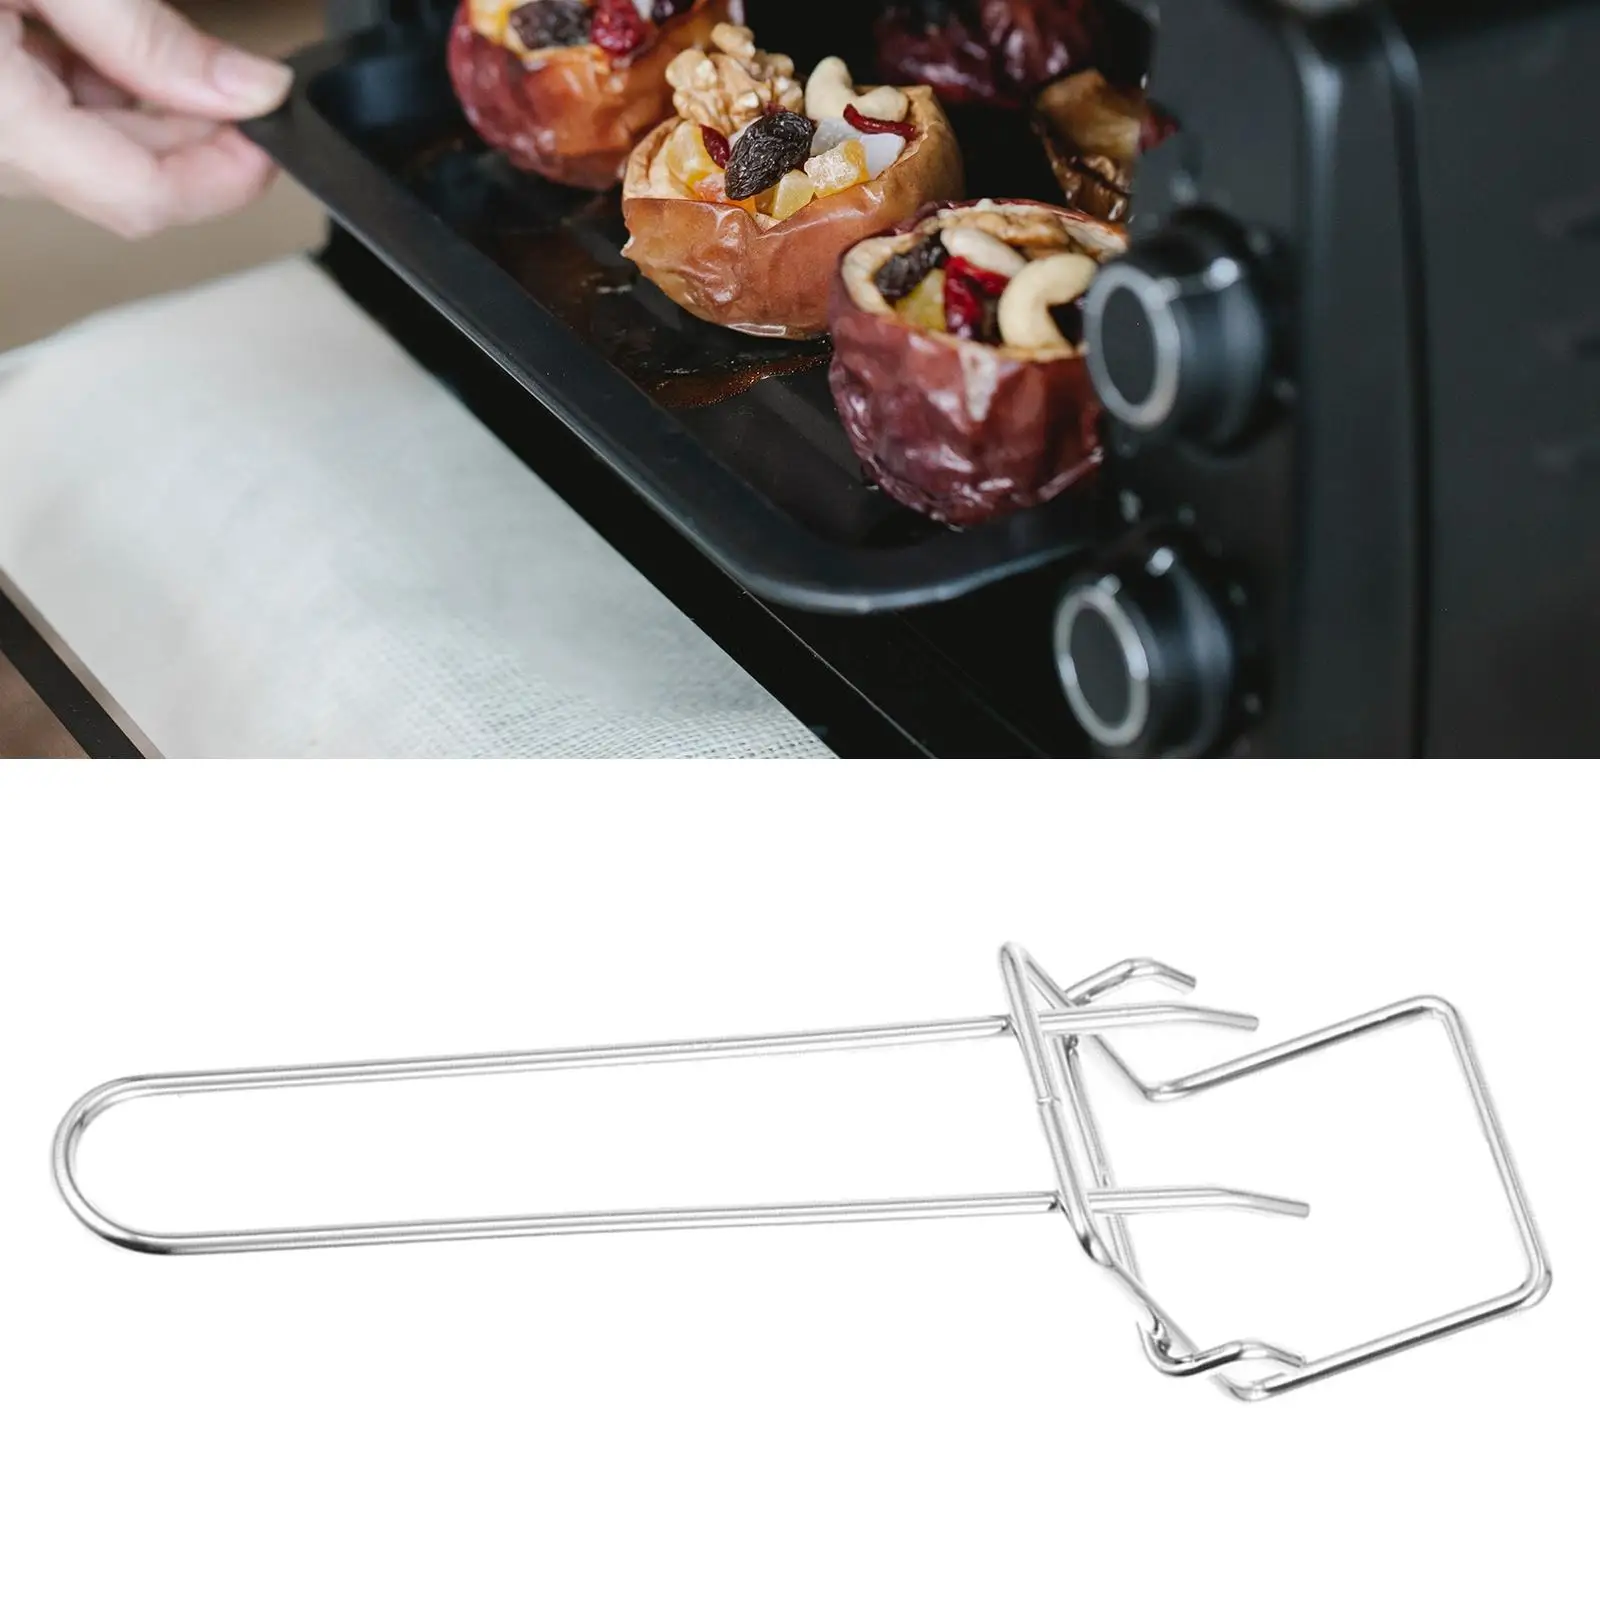 Tongs Convenient Anti Scald Pan Stainless Steel Pot Practical Bowl Clip Bowl Clamp Holder Hot Plate Gripper for Kitchen Cooking